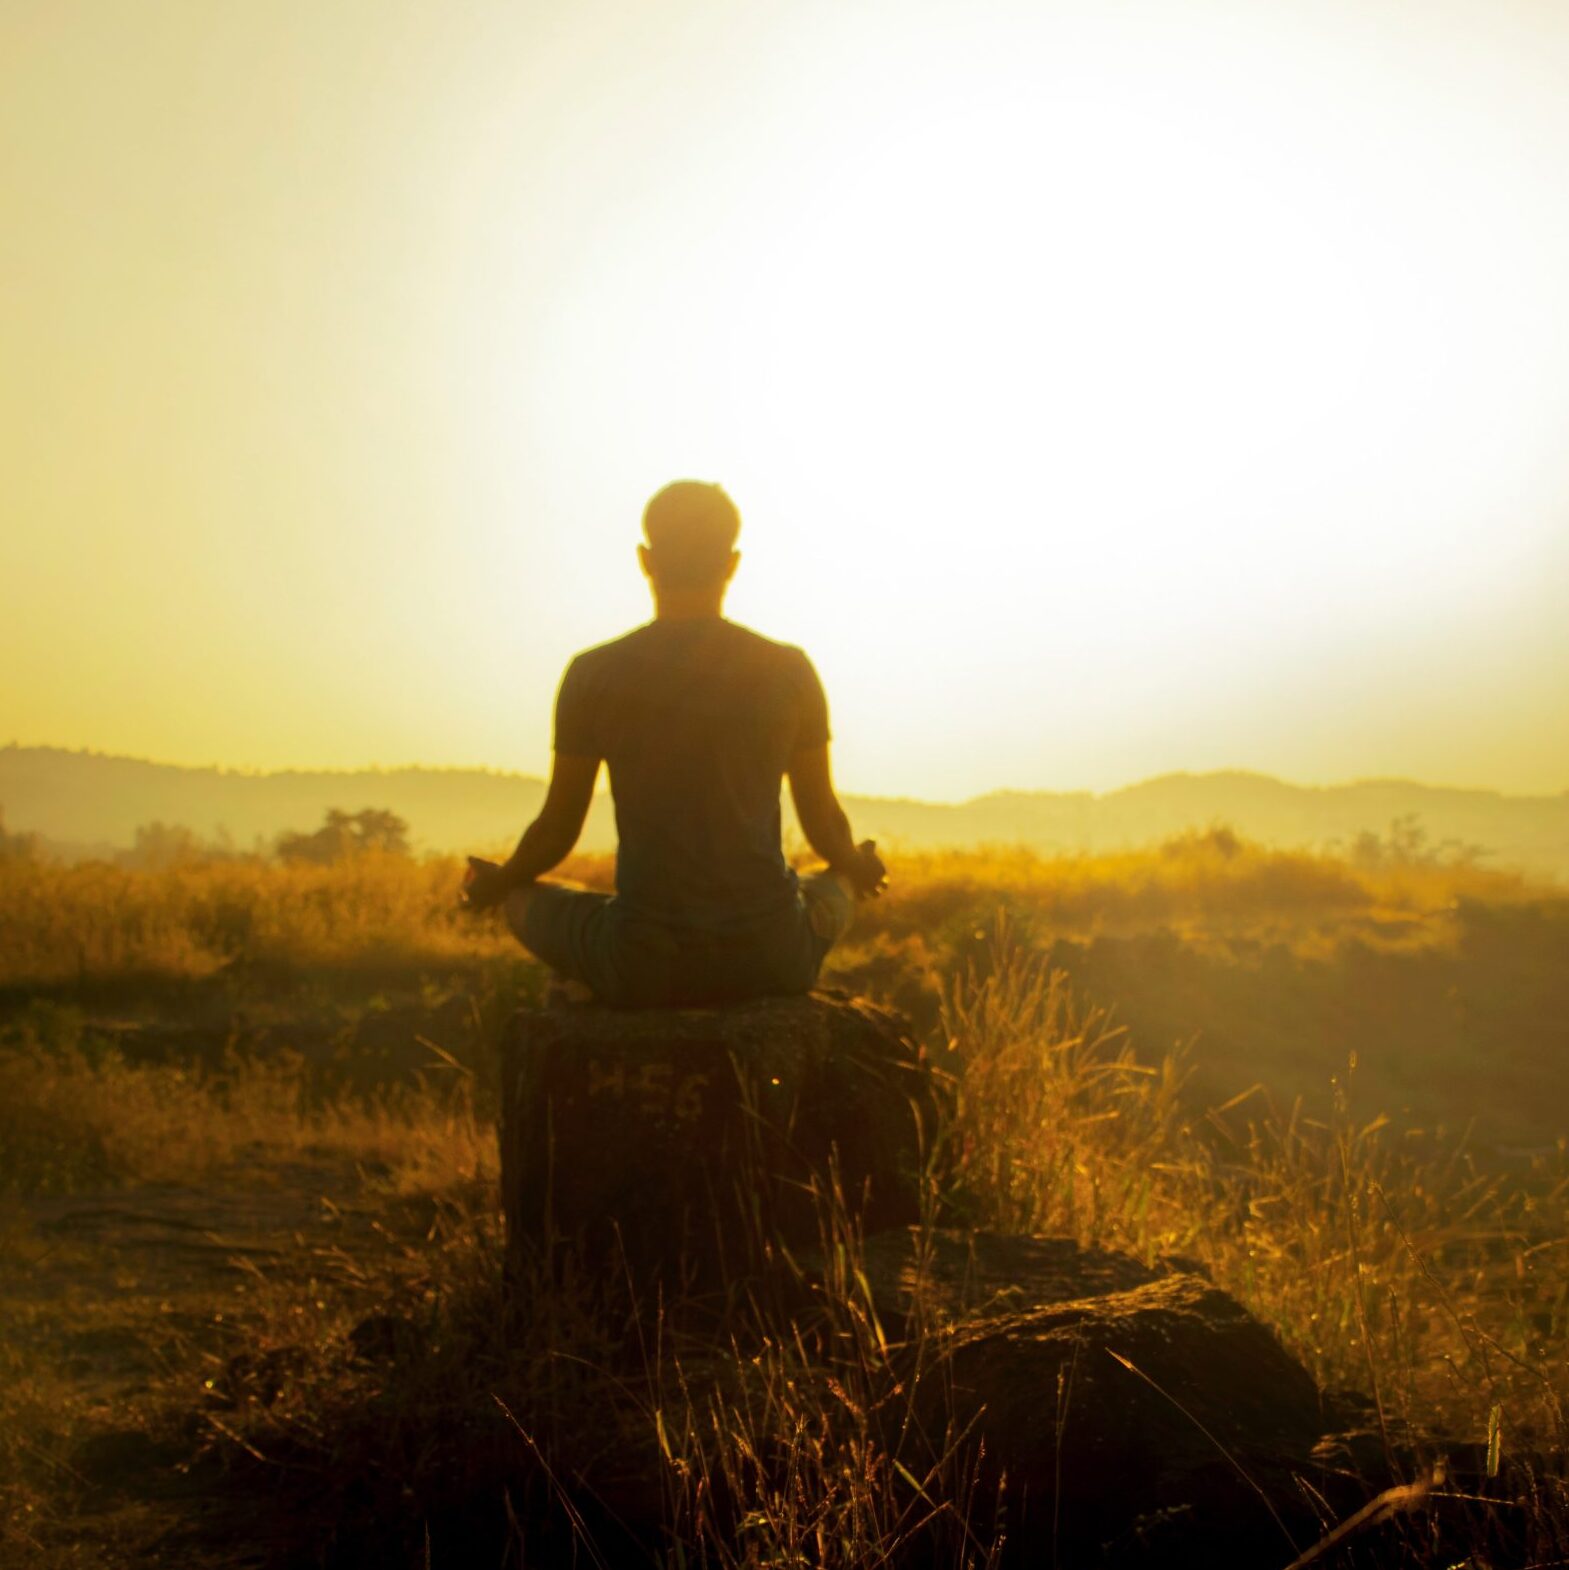 A backlit image of a man meditating with a setting sun.